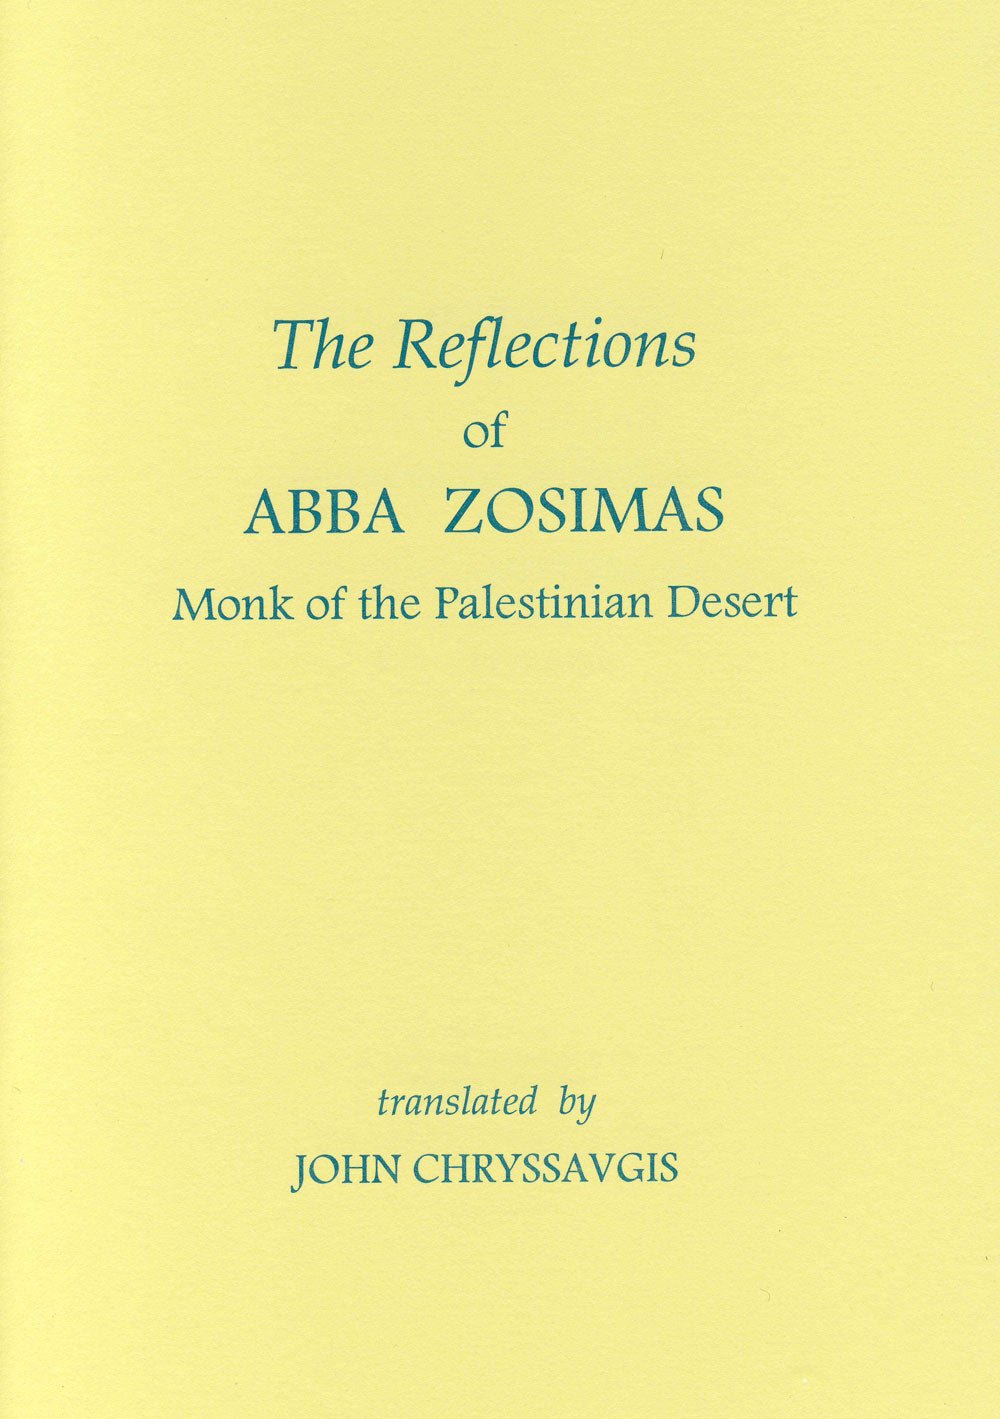 The Reflections of Abba Zosimas - Monk of the Palestinian Desert - Holy Cross Monastery